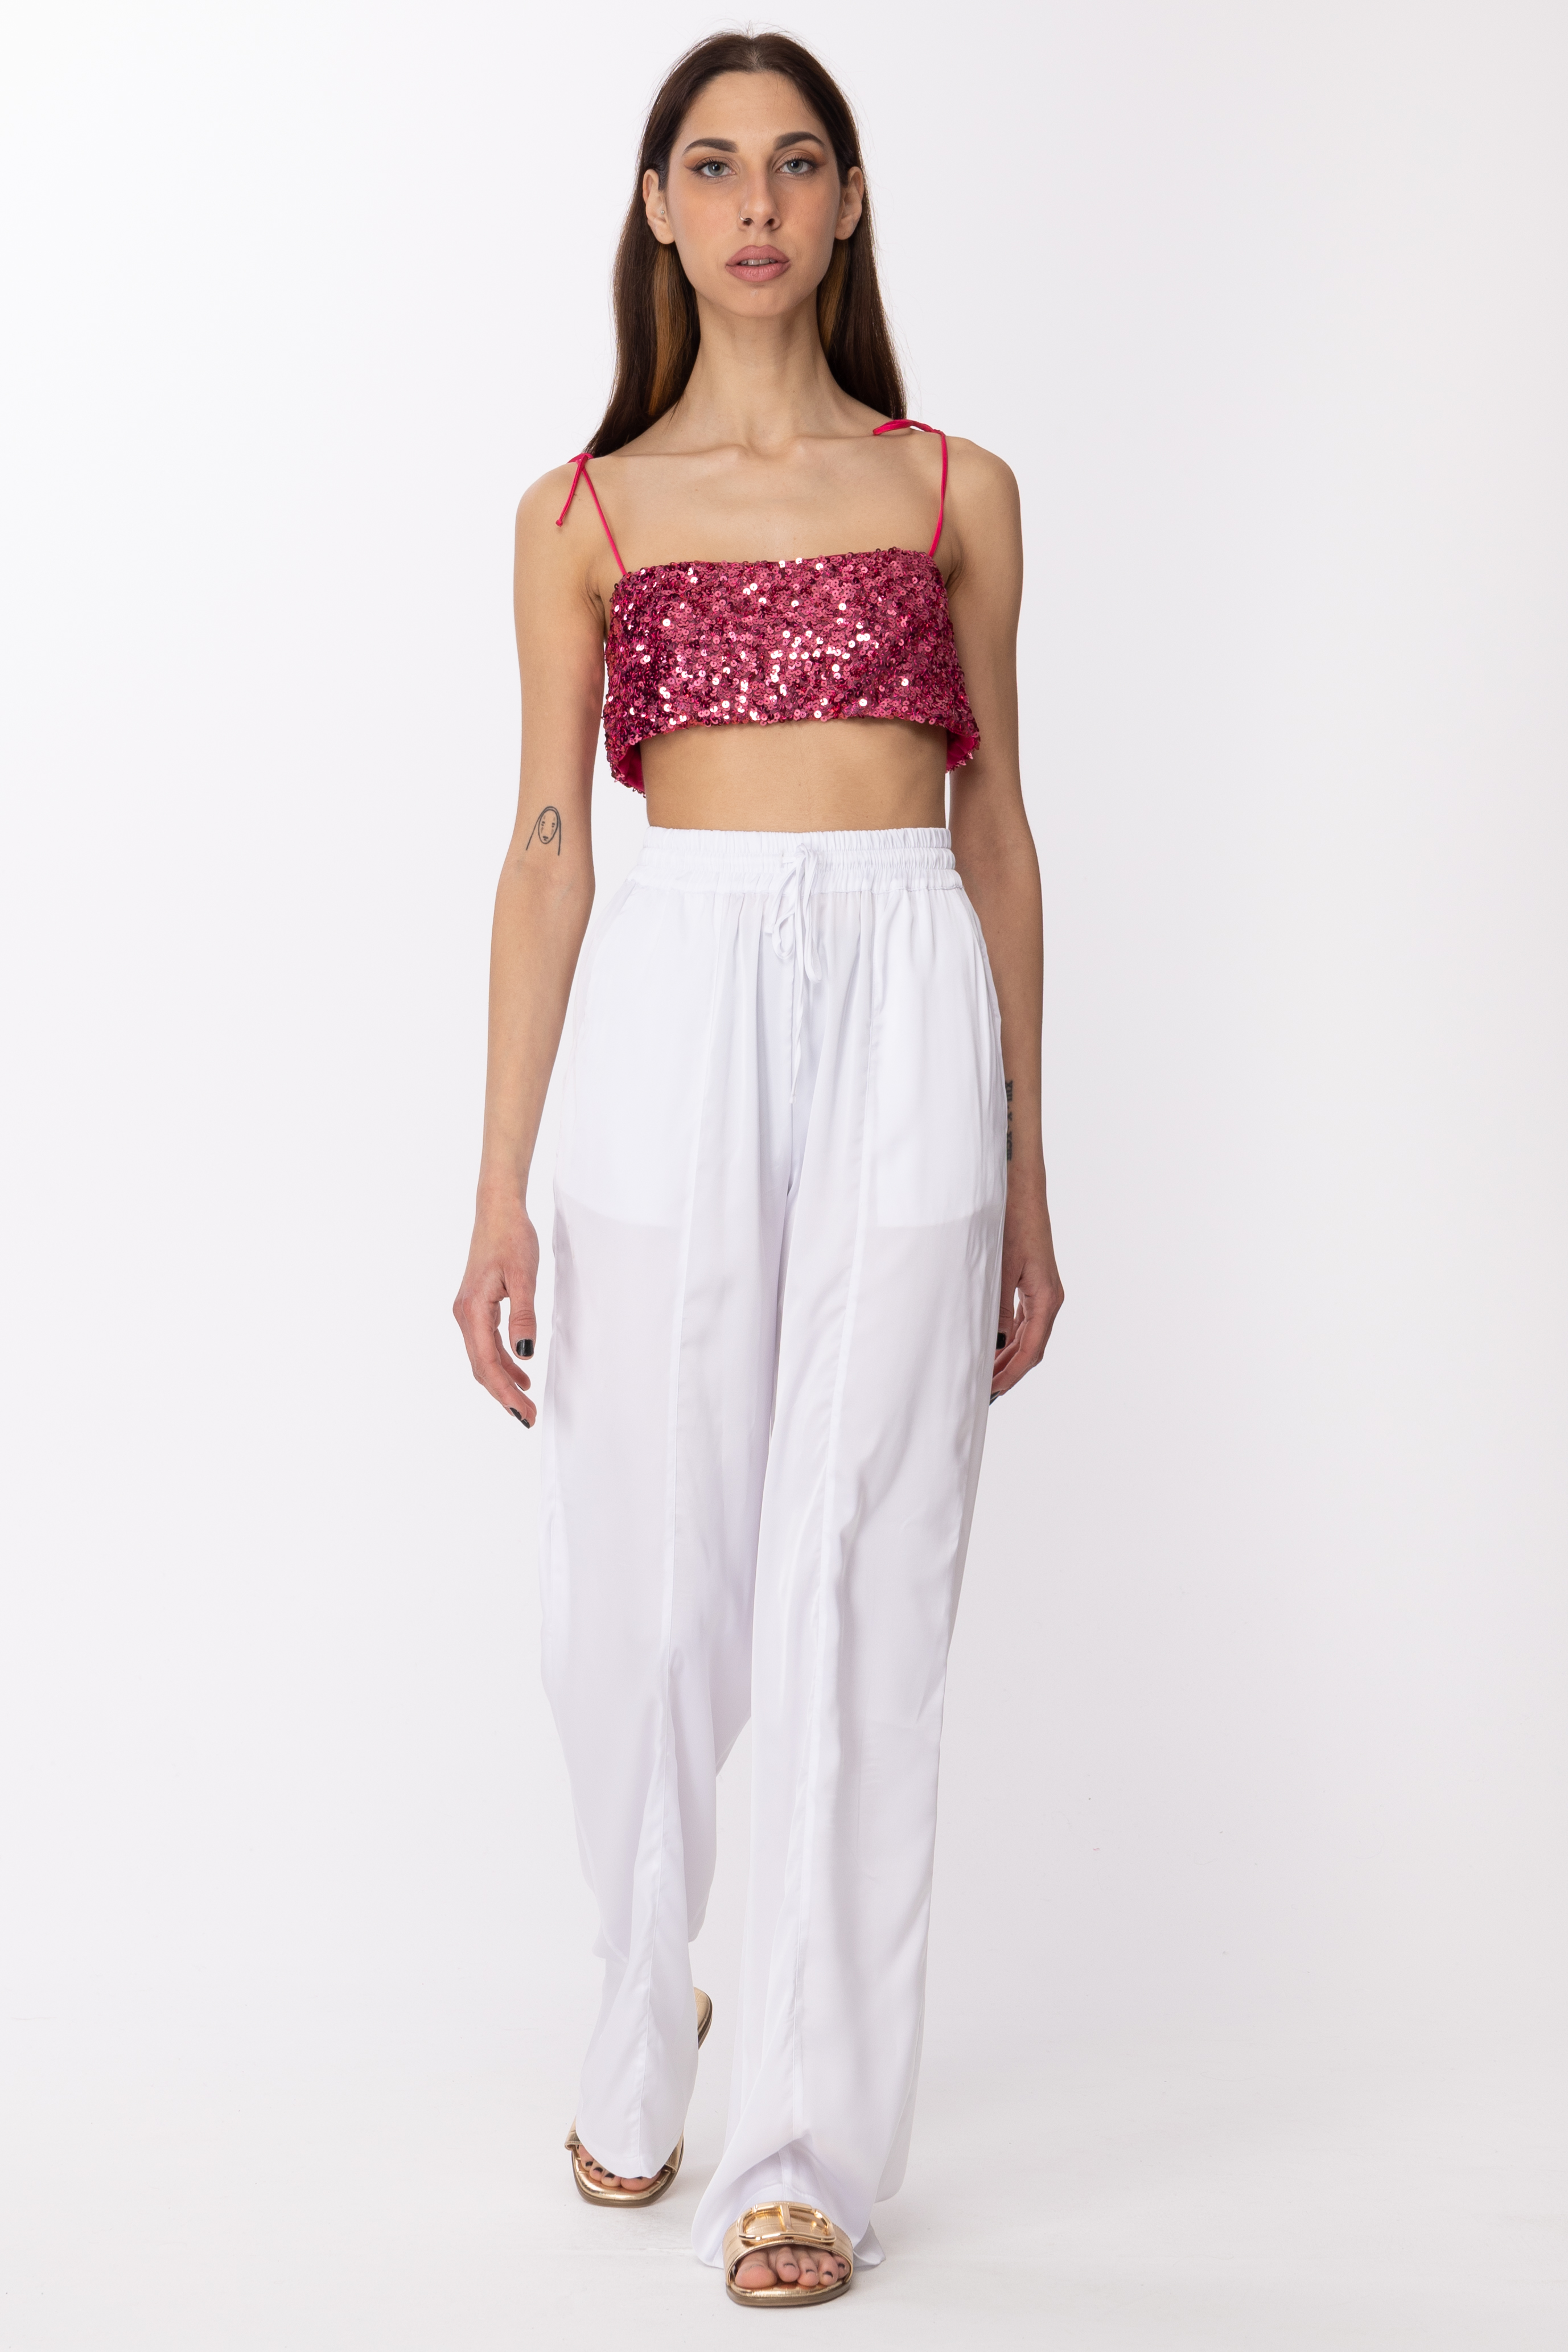 Preview: Aniye By Full sequin crop top FUCHSIA